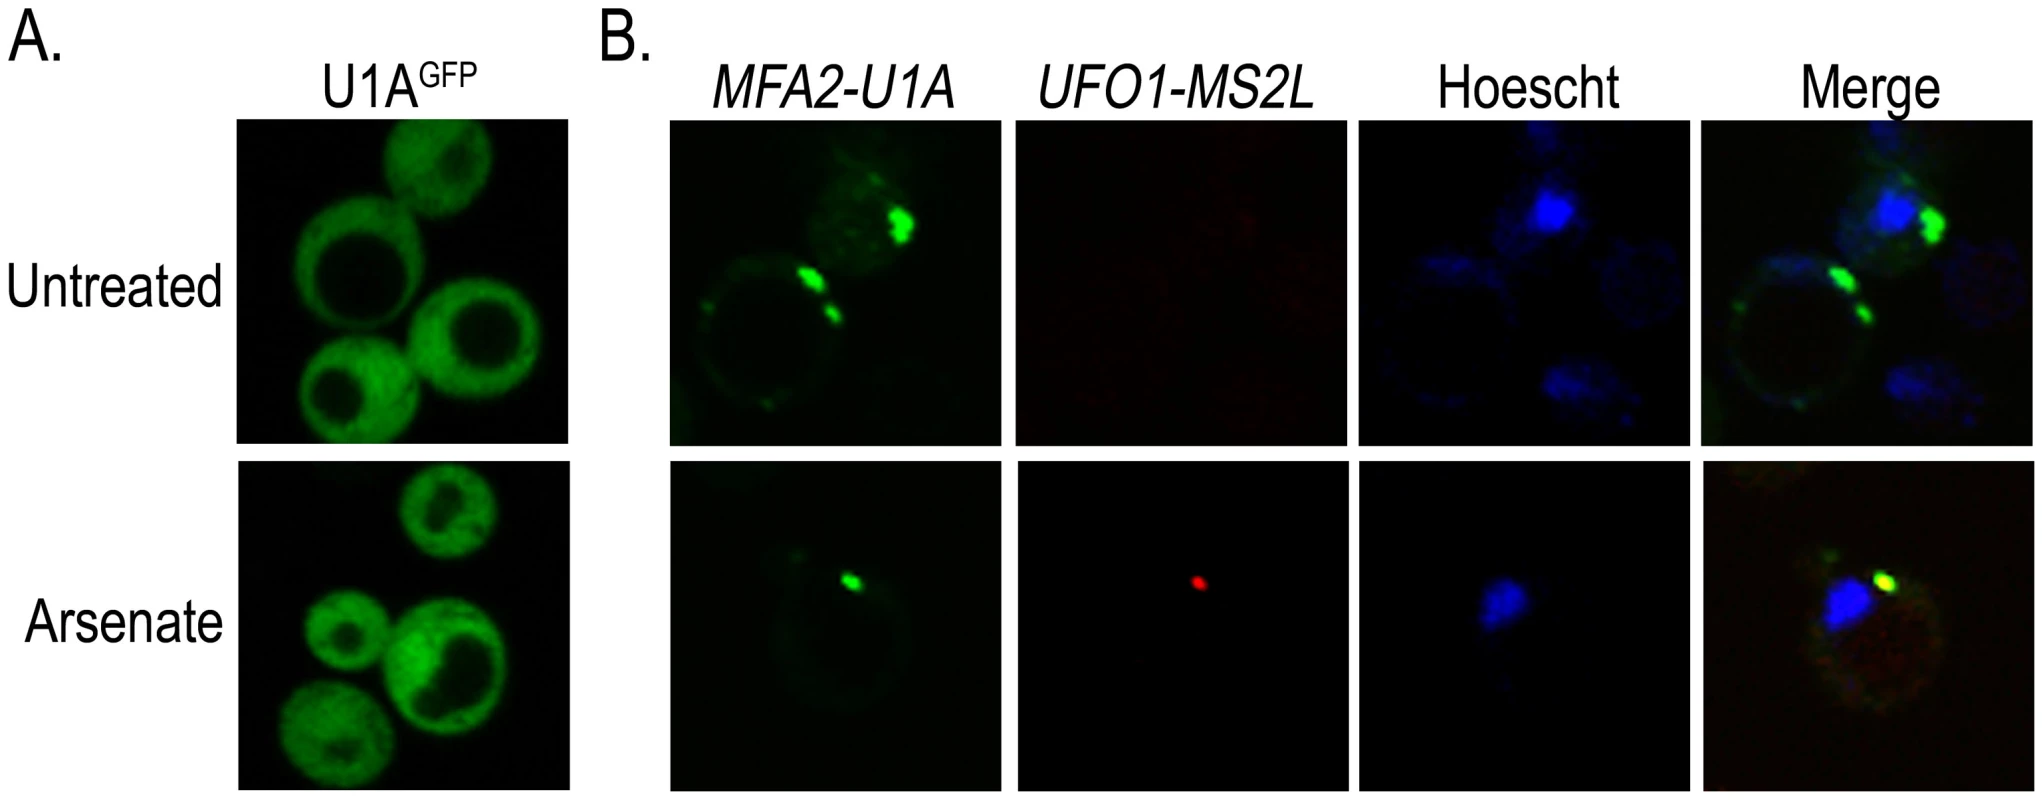 <i>UFO1-MS2L</i> and <i>MFA2-U1A</i> mRNAs are sequestered in the same PBs after arsenate stress.